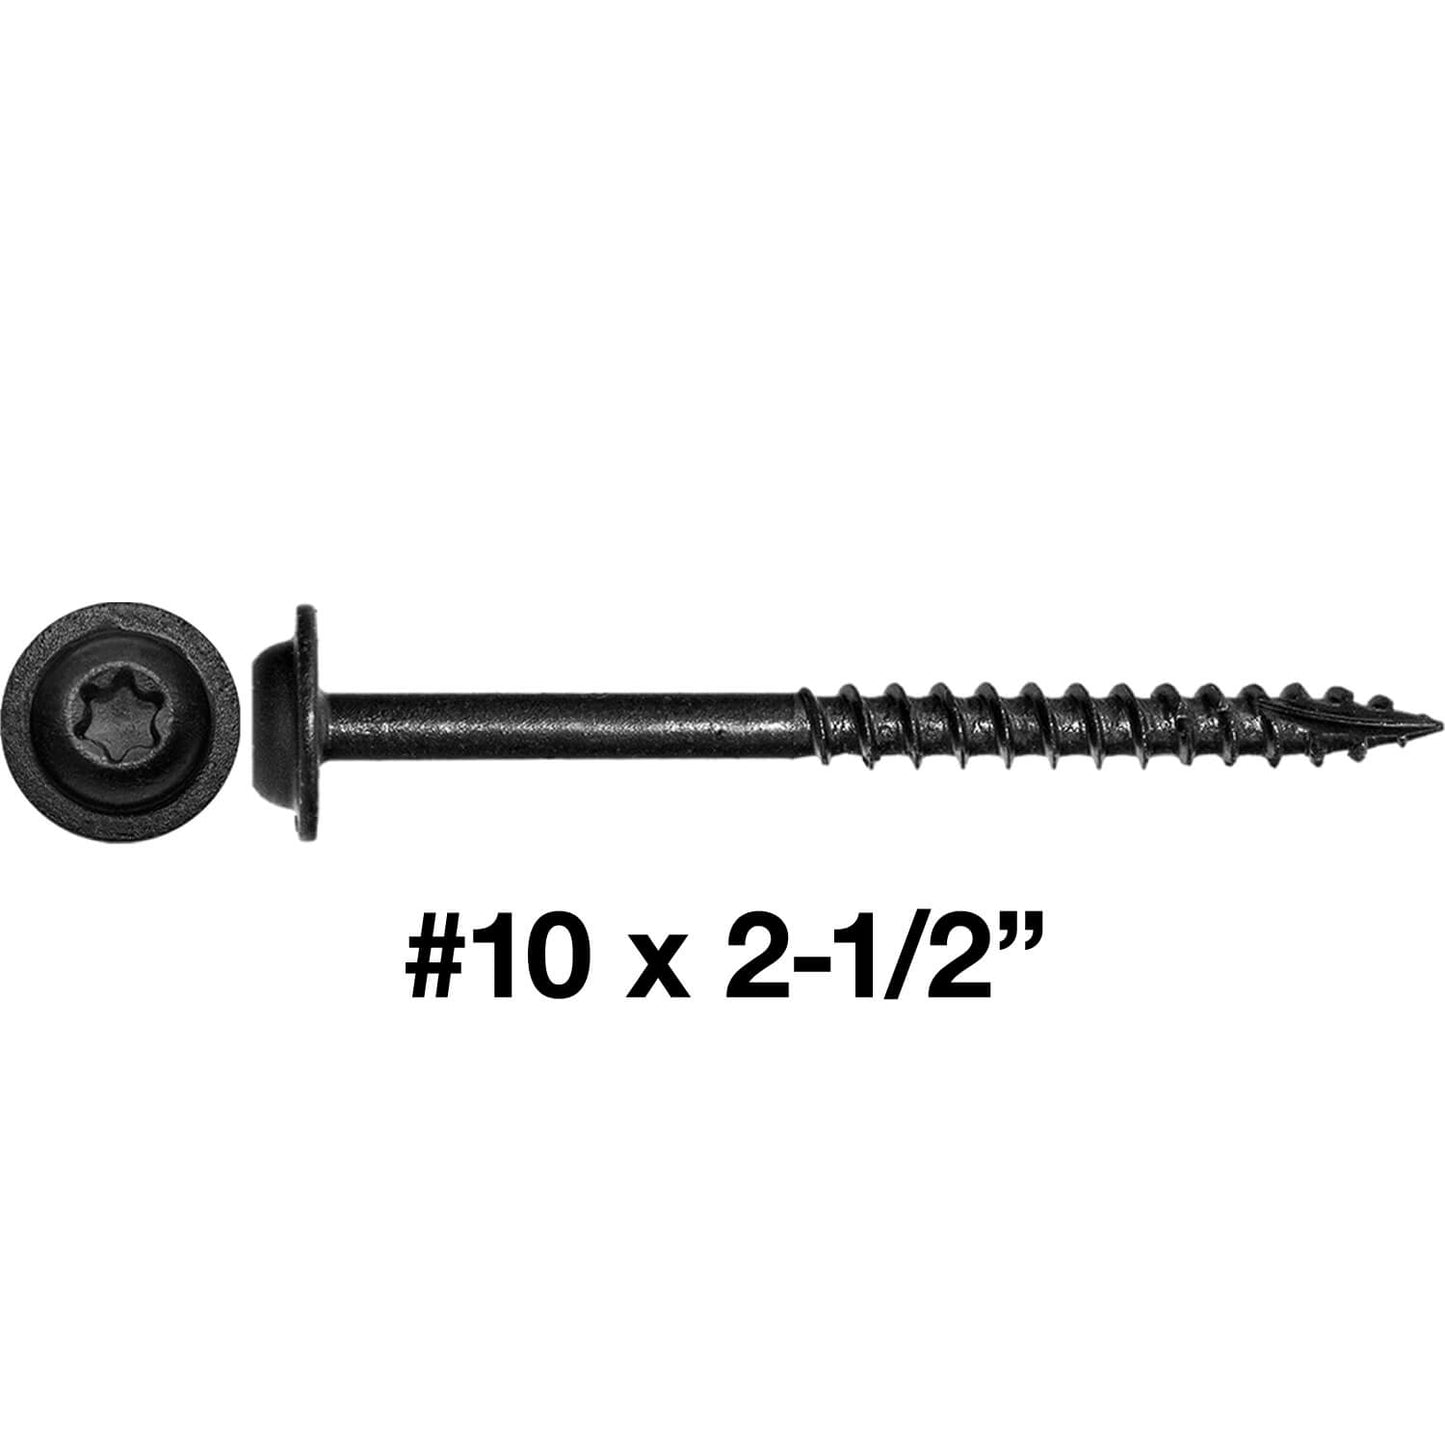 #10 Round Washer Head Truss Head Screw. Torx/Star Drive Head Wood Screws. Multipurpose Cabinet, Furniture, Siding and Trim and General Construction